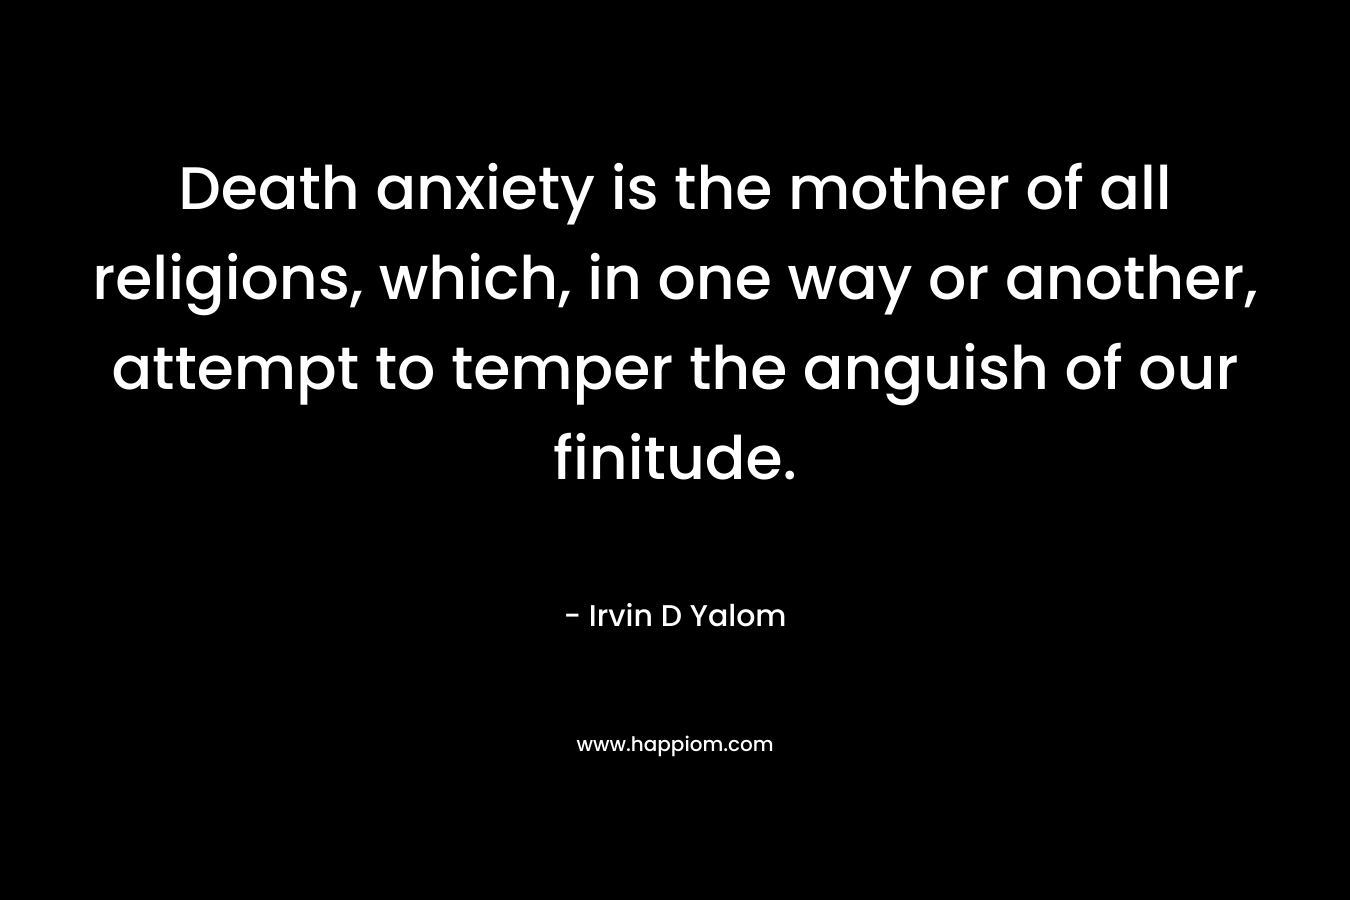 Death anxiety is the mother of all religions, which, in one way or another, attempt to temper the anguish of our finitude.